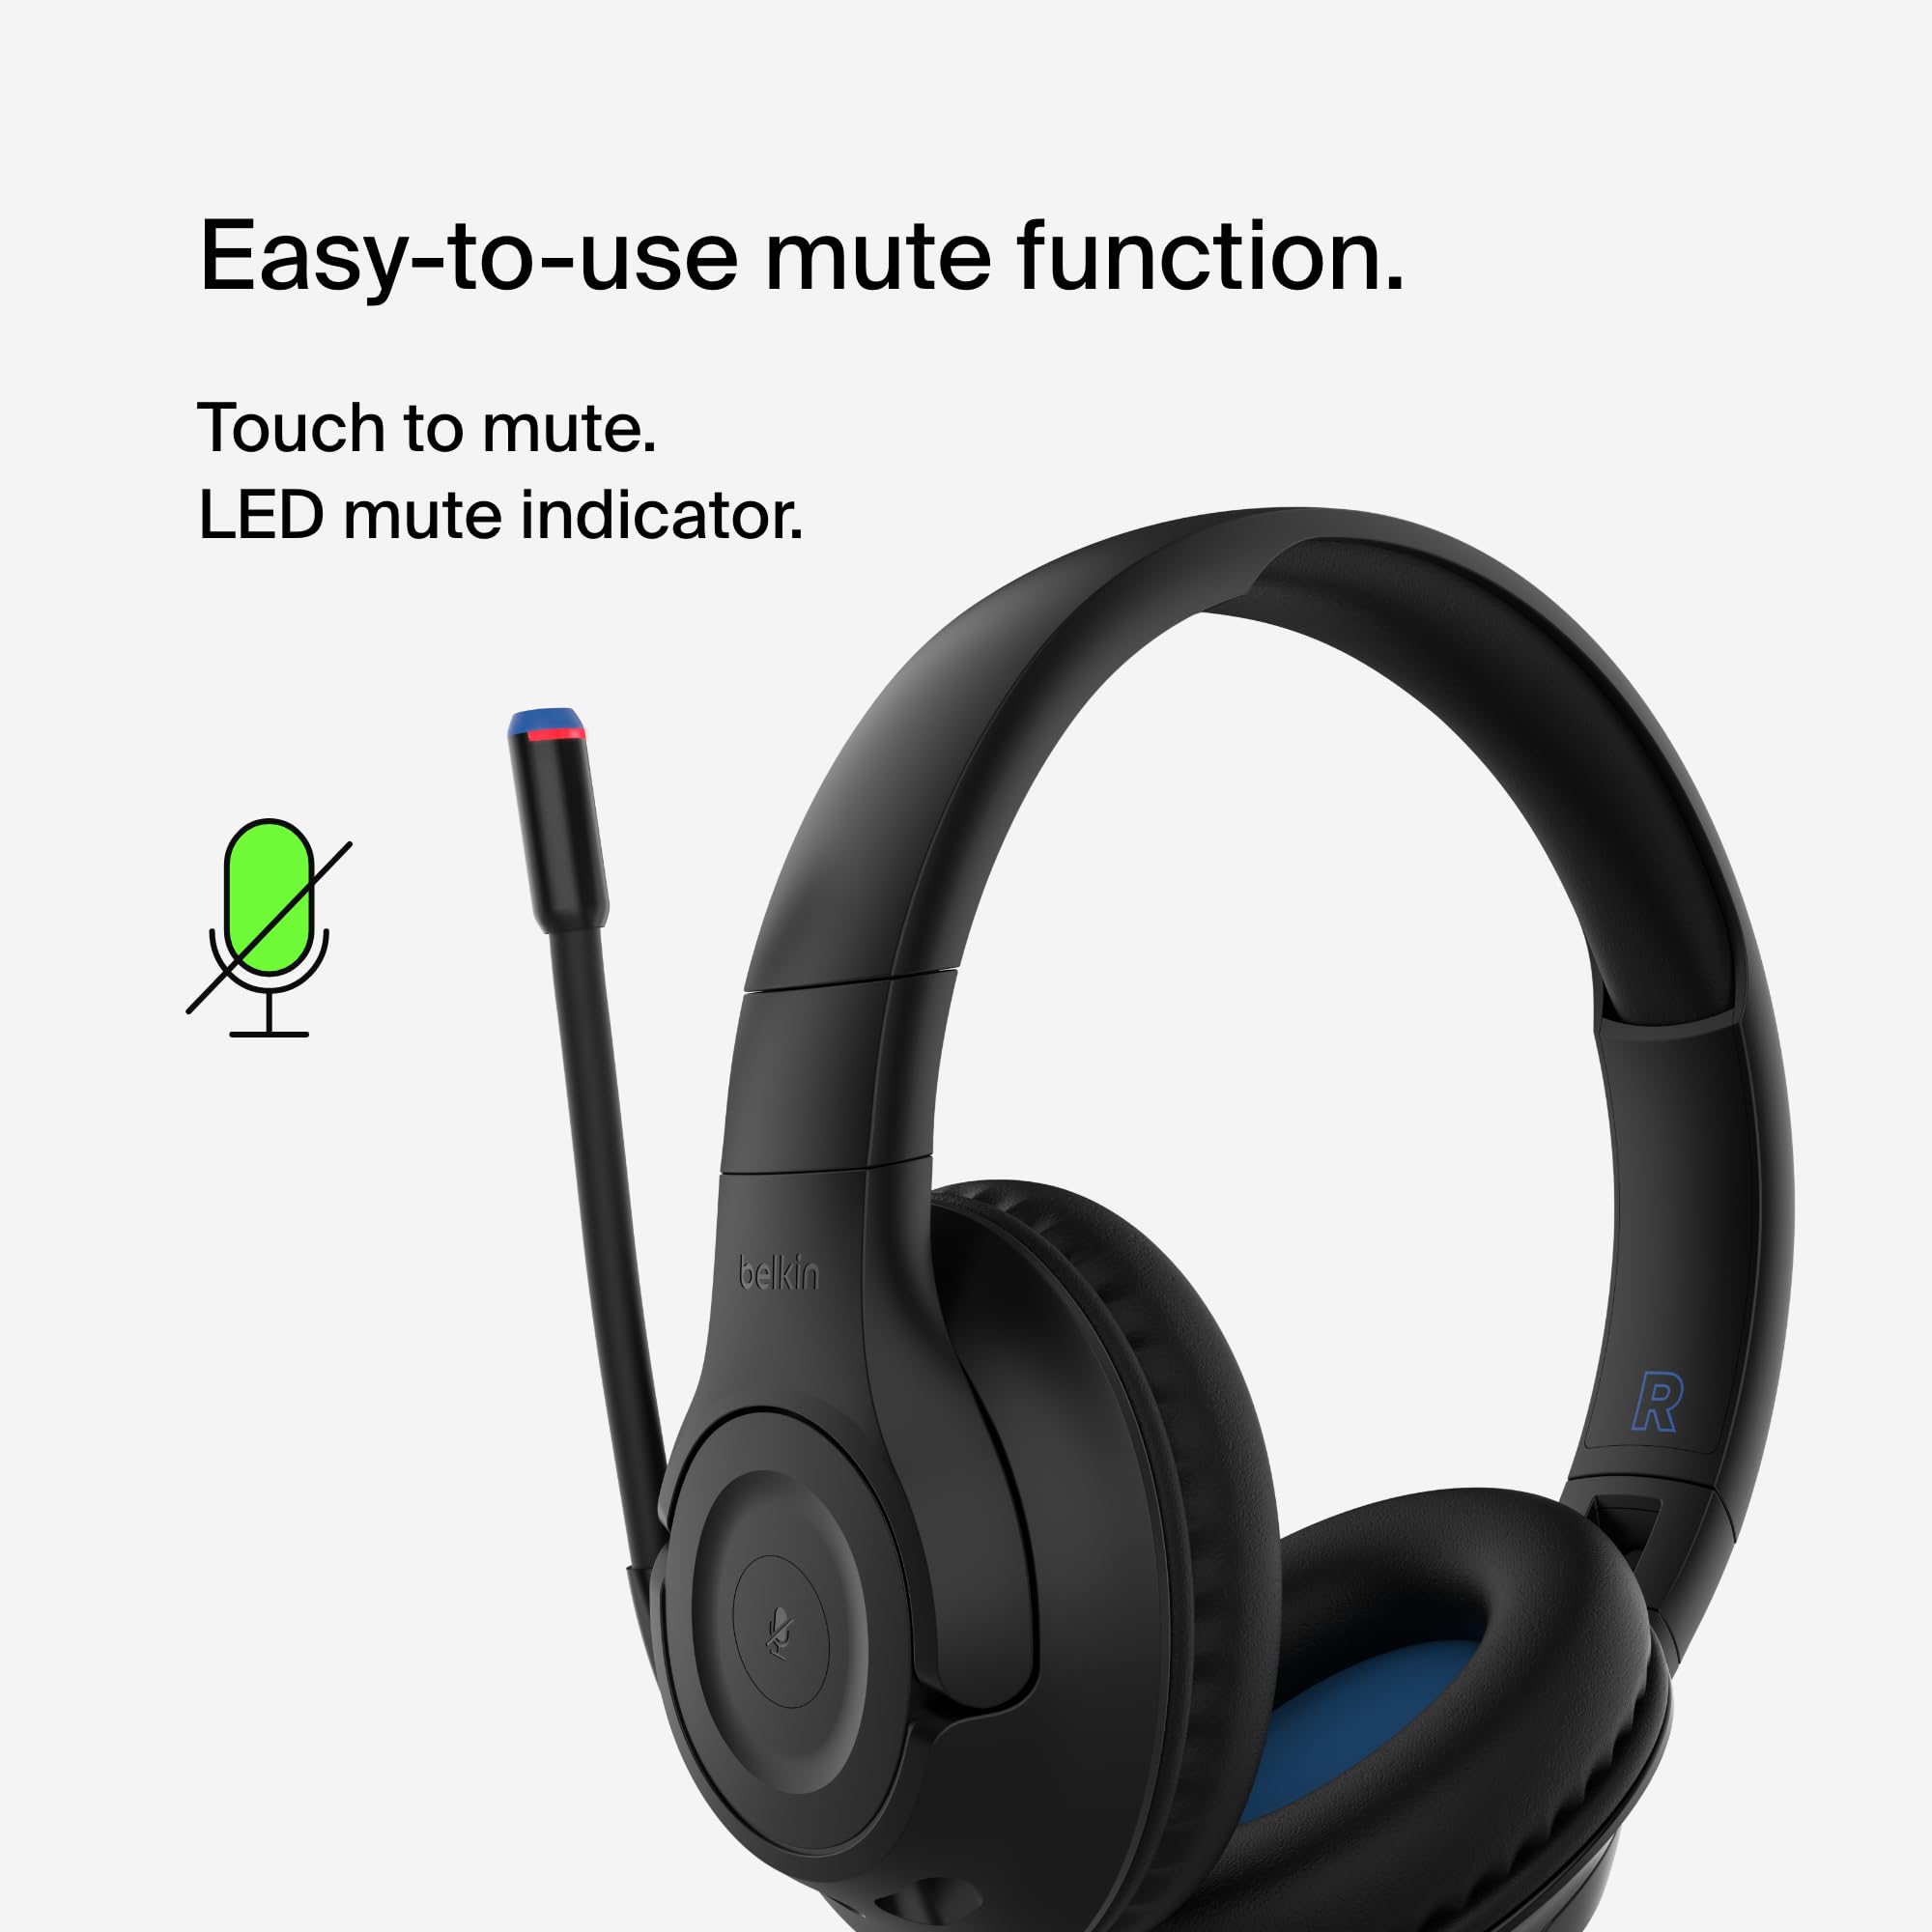 Belkin SoundForm Inspire Wireless Over-Ear Headset for Kids, Headphones for Girls and Boys, Online Learning, & Travel with Built-in Microphone-Compatible with iPhone, iPad, Galaxy, and More - Black